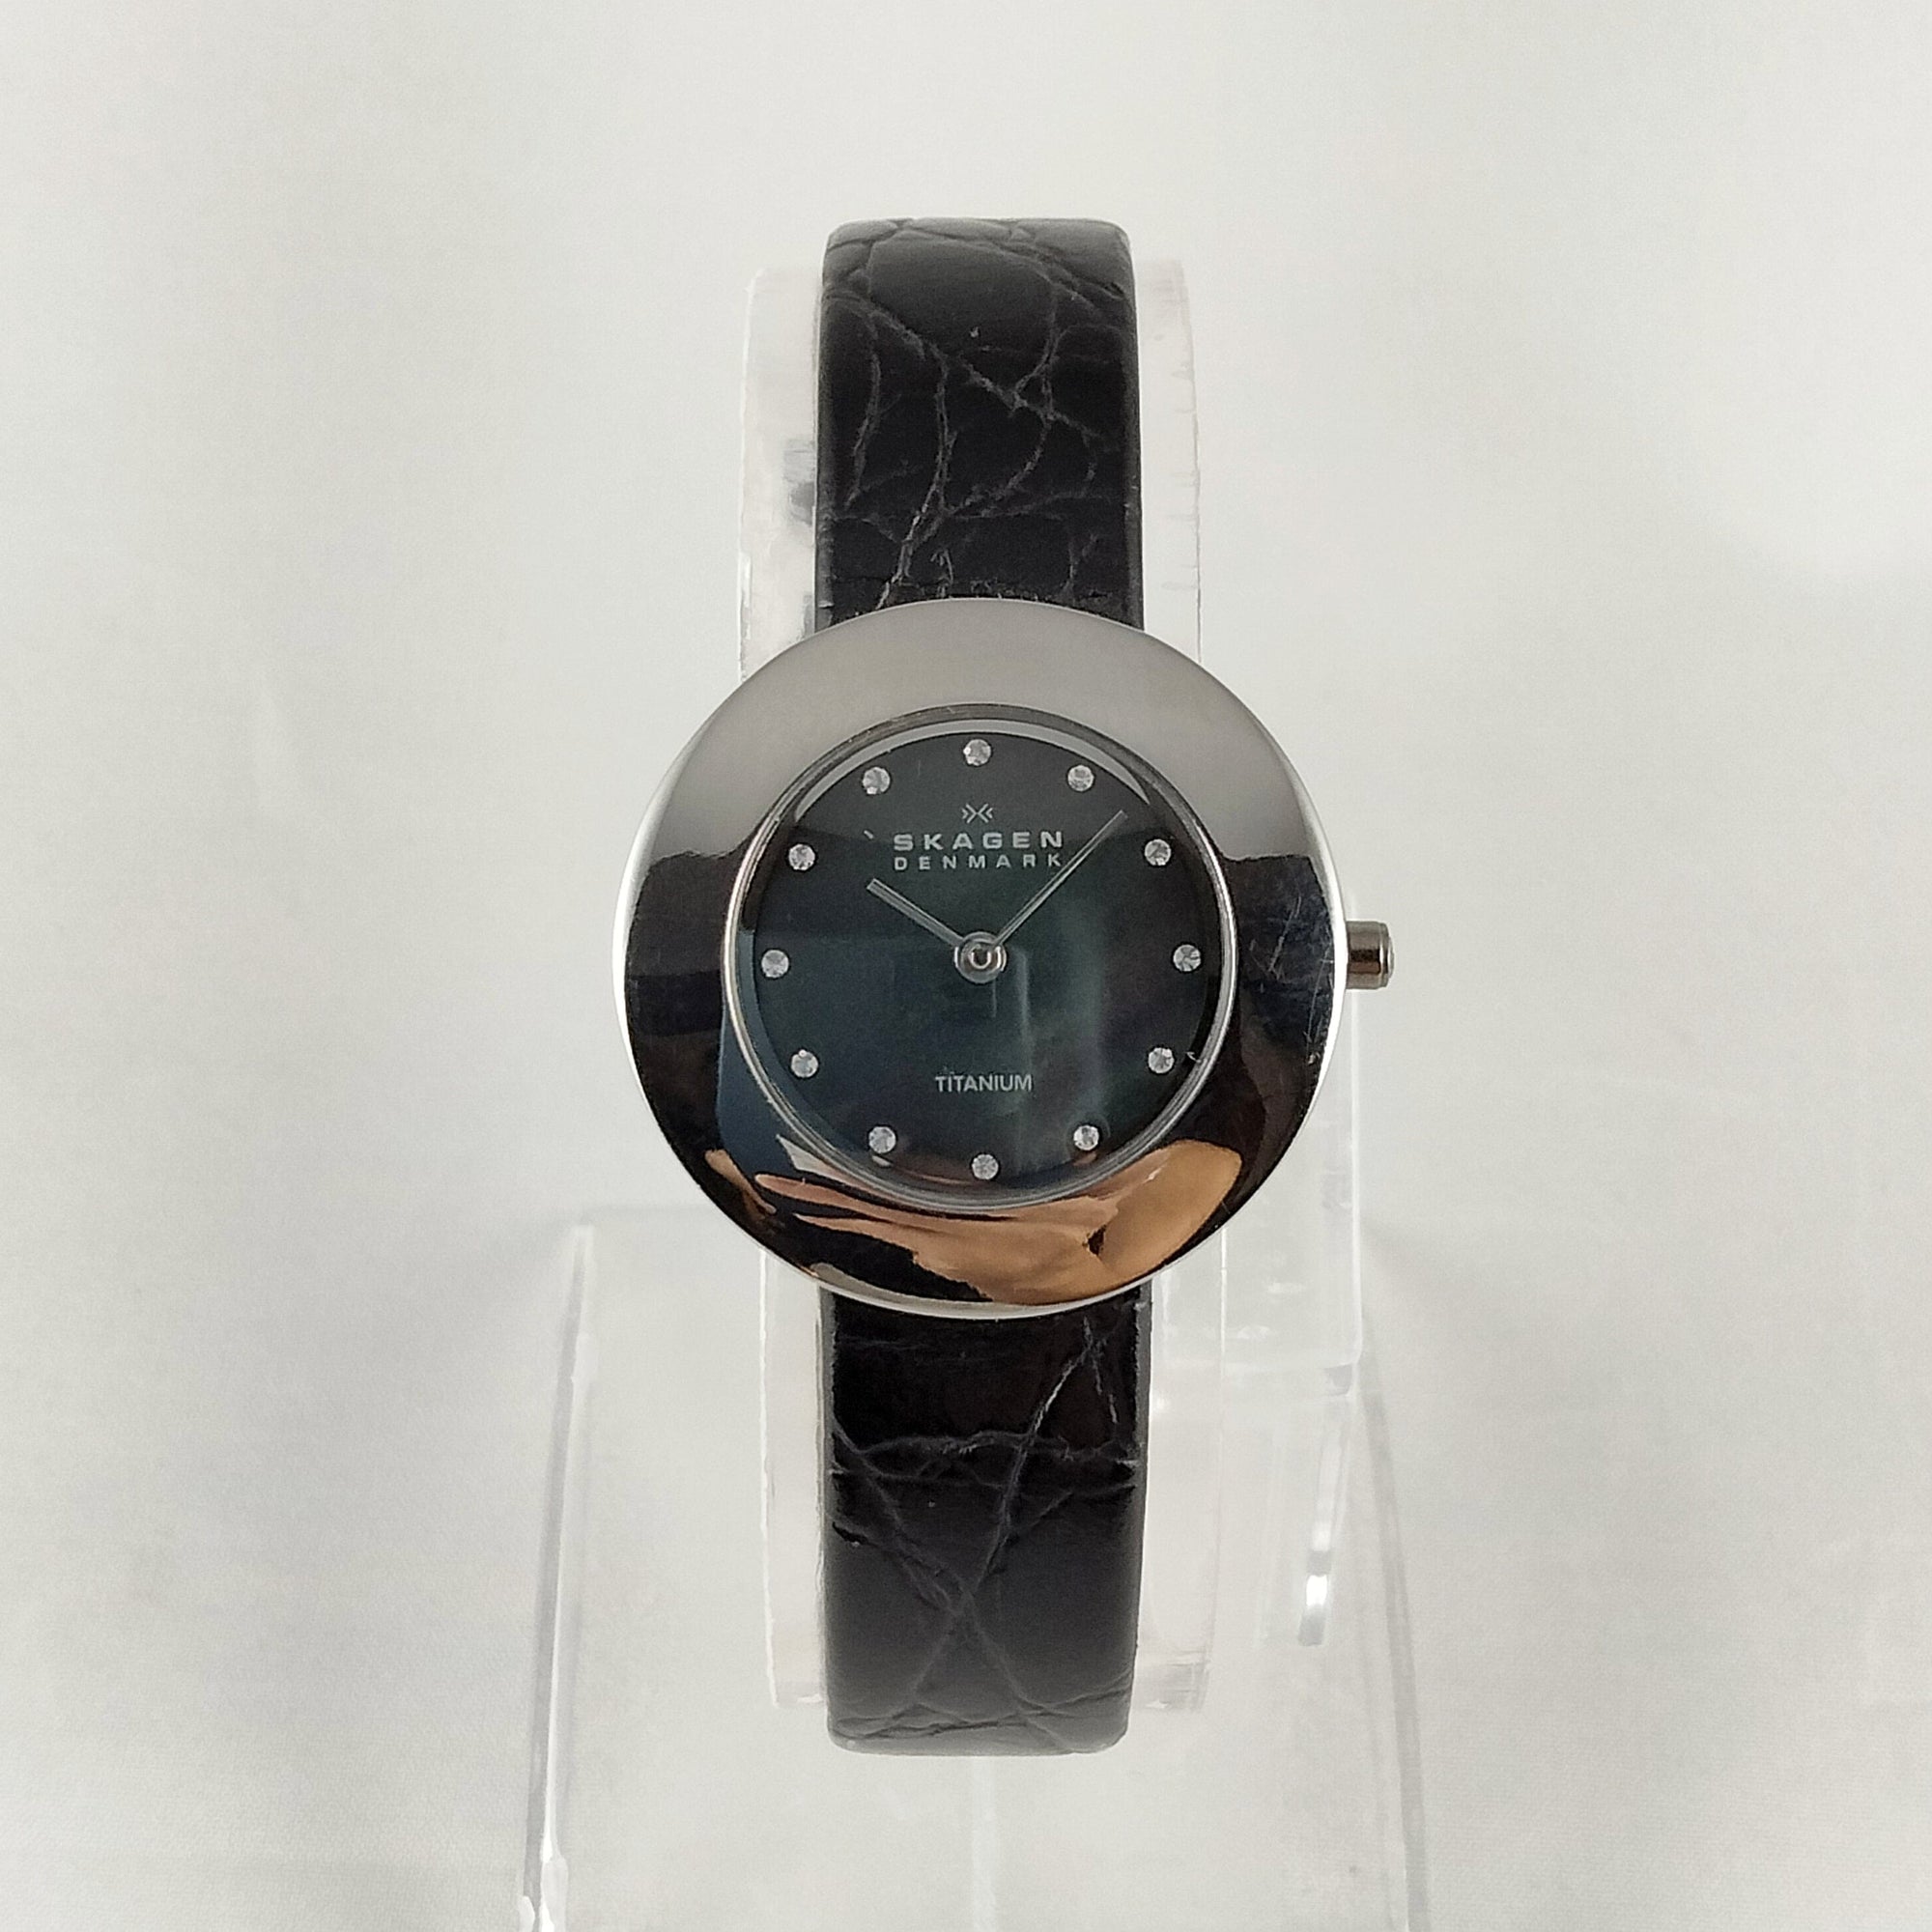 I Like Mikes Mid Century Modern Watches Skagen Titanium Watch, Black Mother of Pearl Dial, Genuine Black Leather Strap